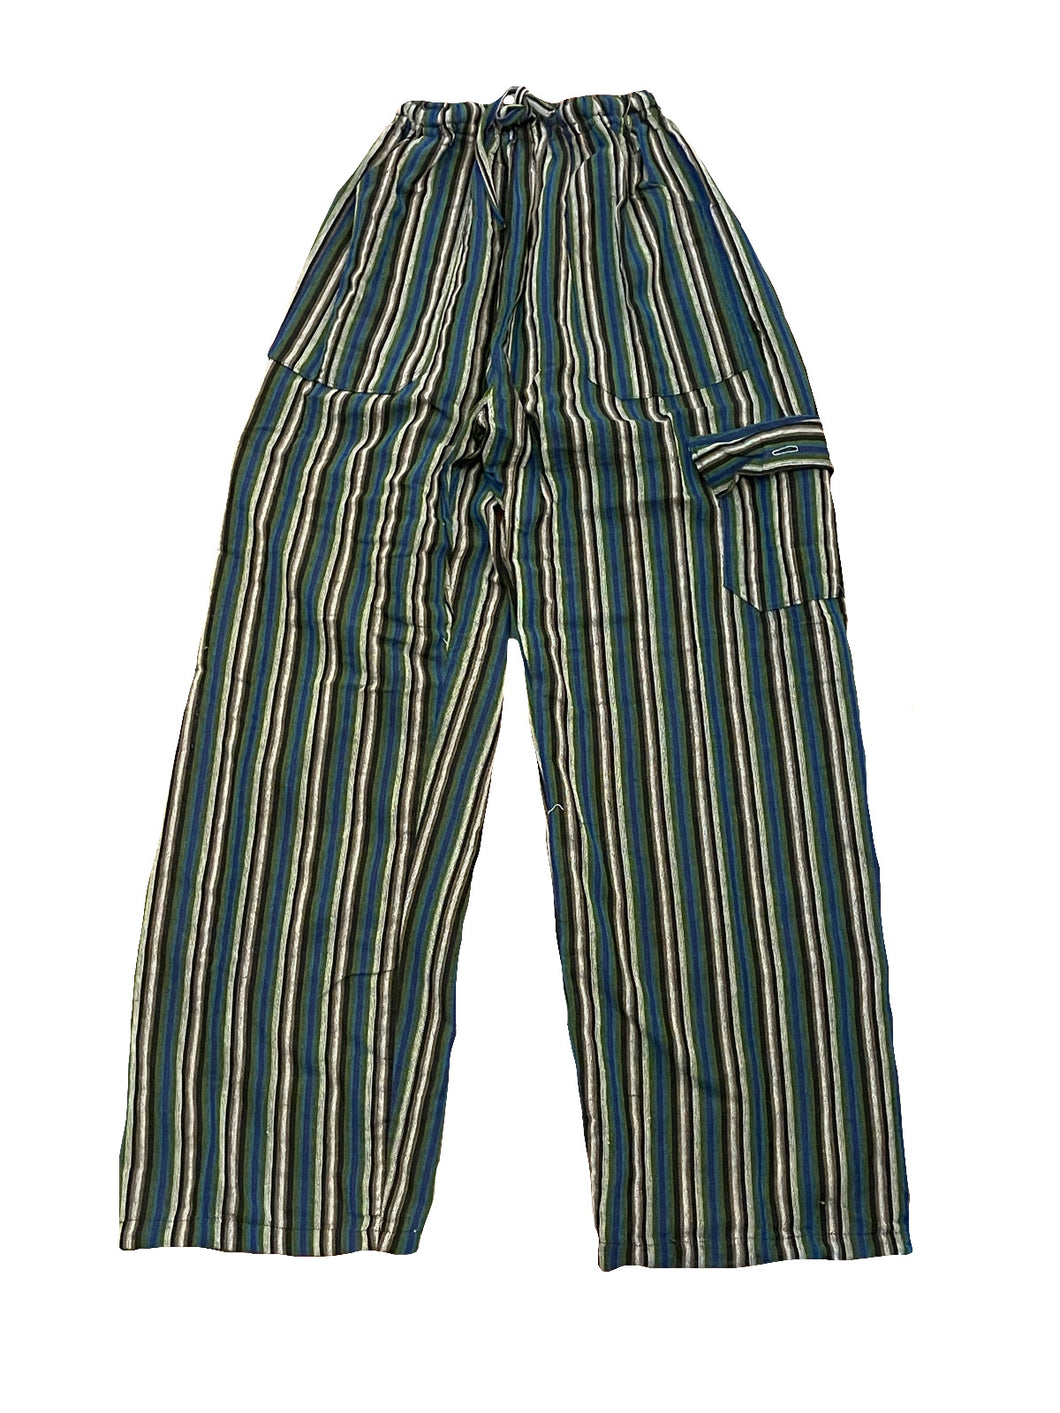 Parrot Teal Striped Pants